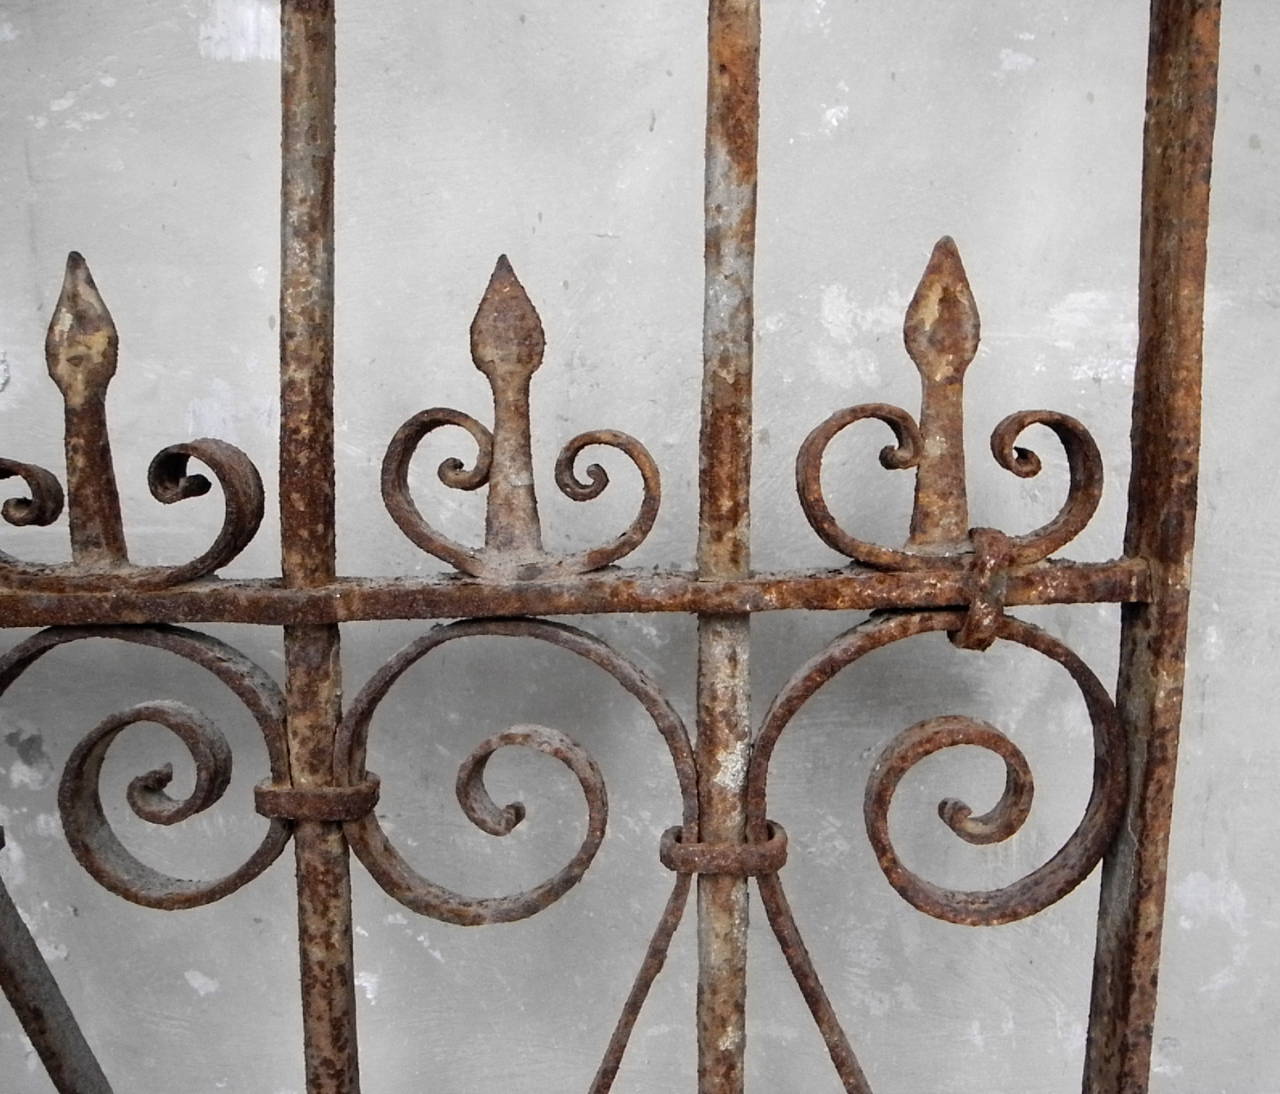 Hammered Small Antique Iron Gate